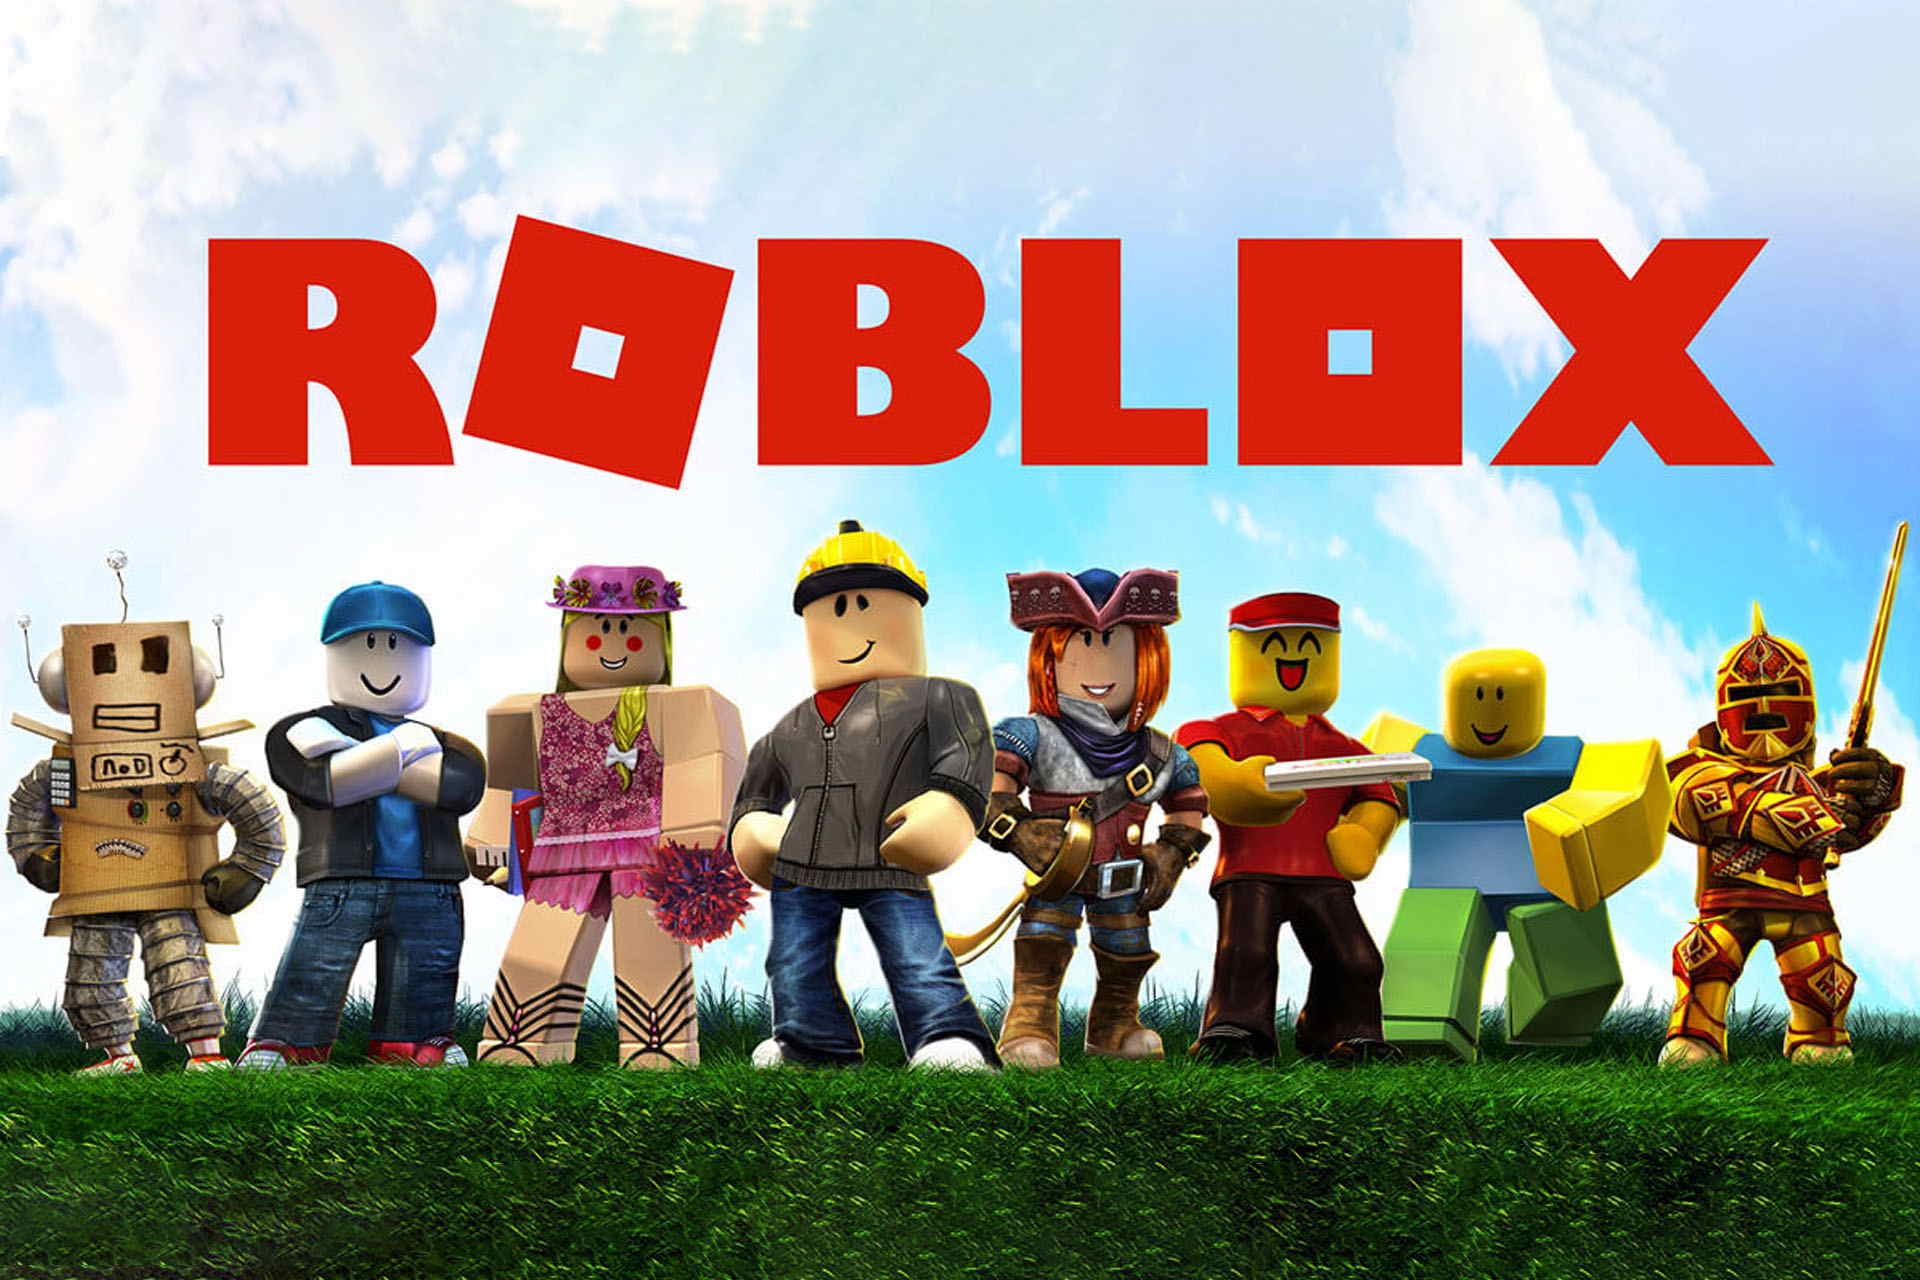 5 Alternative Games Like Roblox To Play Online - games like roblox for free